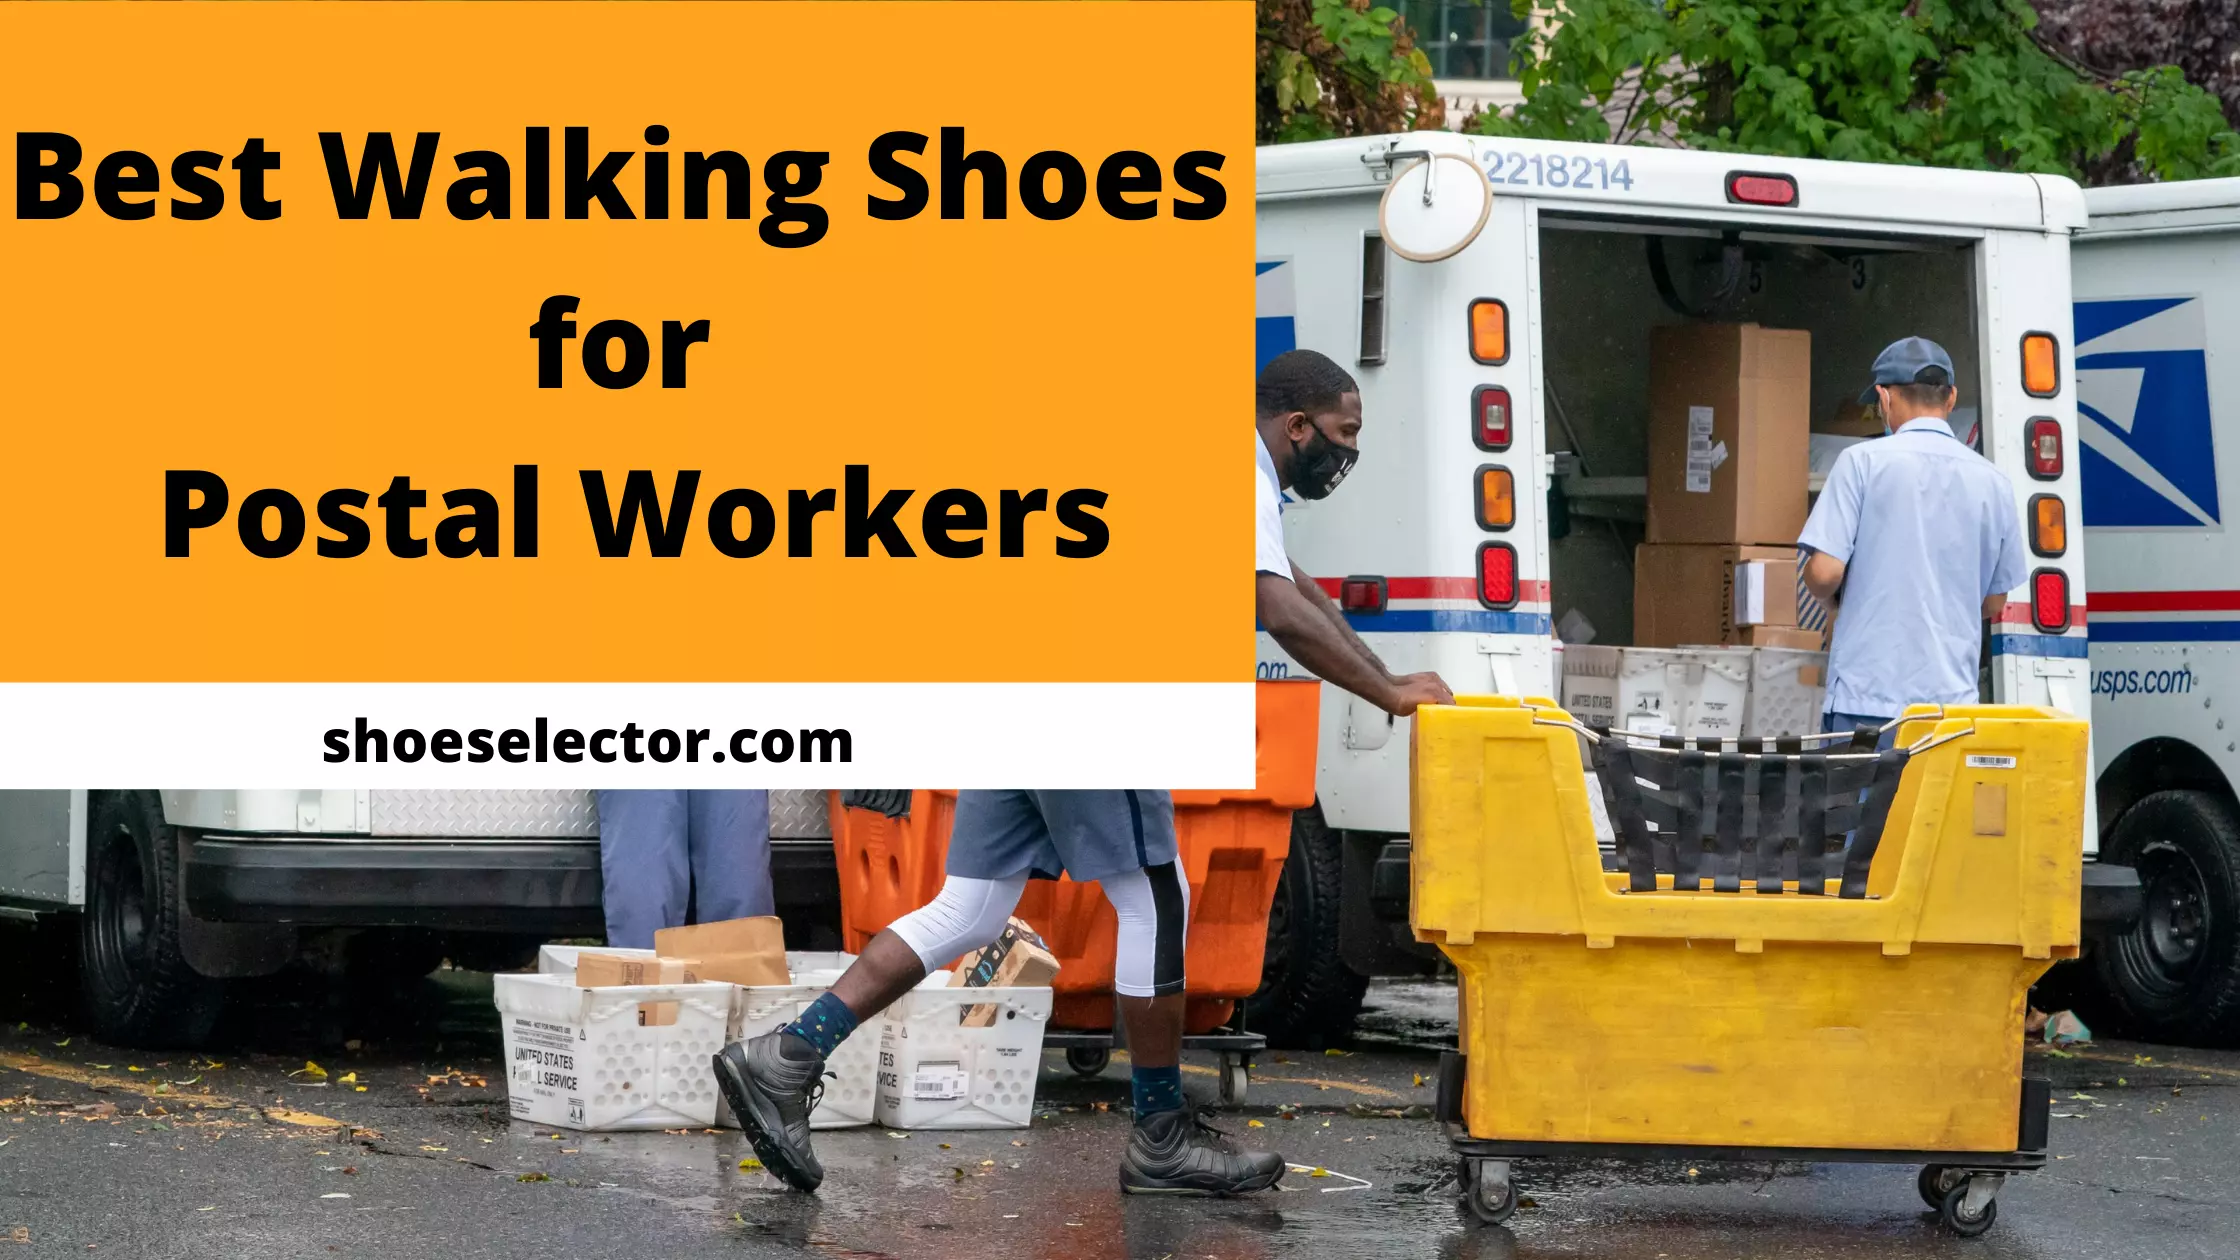 Best Walking Shoes For Postal Workers - Recommended Guide